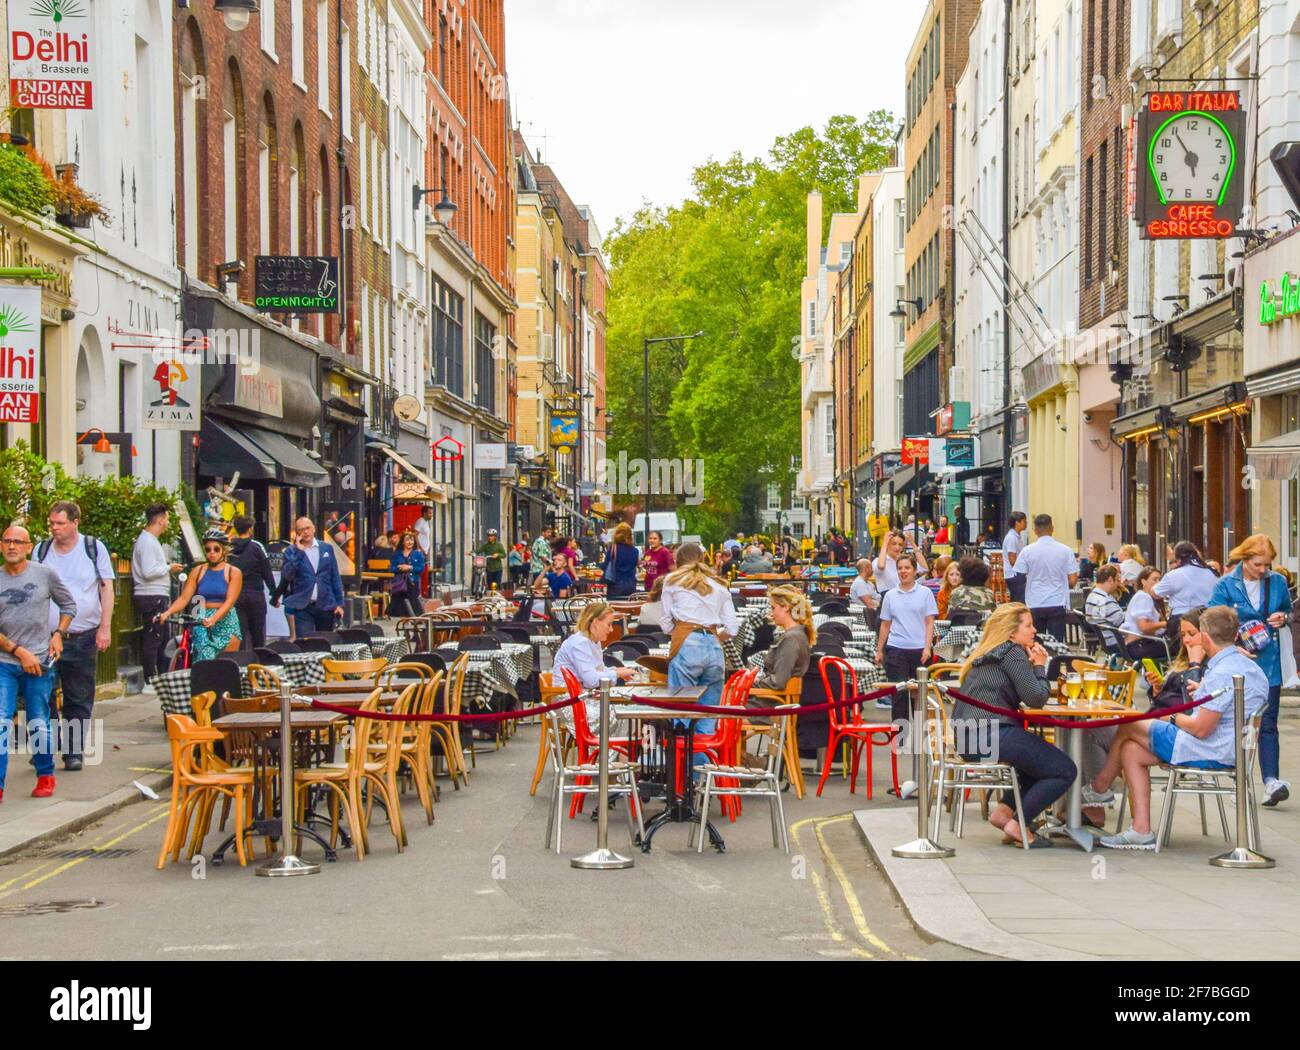 Crowd of people in Frith Street, Soho. Temporary al fresco street seating was implemented to allow bars and restaurants to operate and facilitate social distancing during the coronavirus pandemic. London, United Kingdom, 21st August 2020. Stock Photo